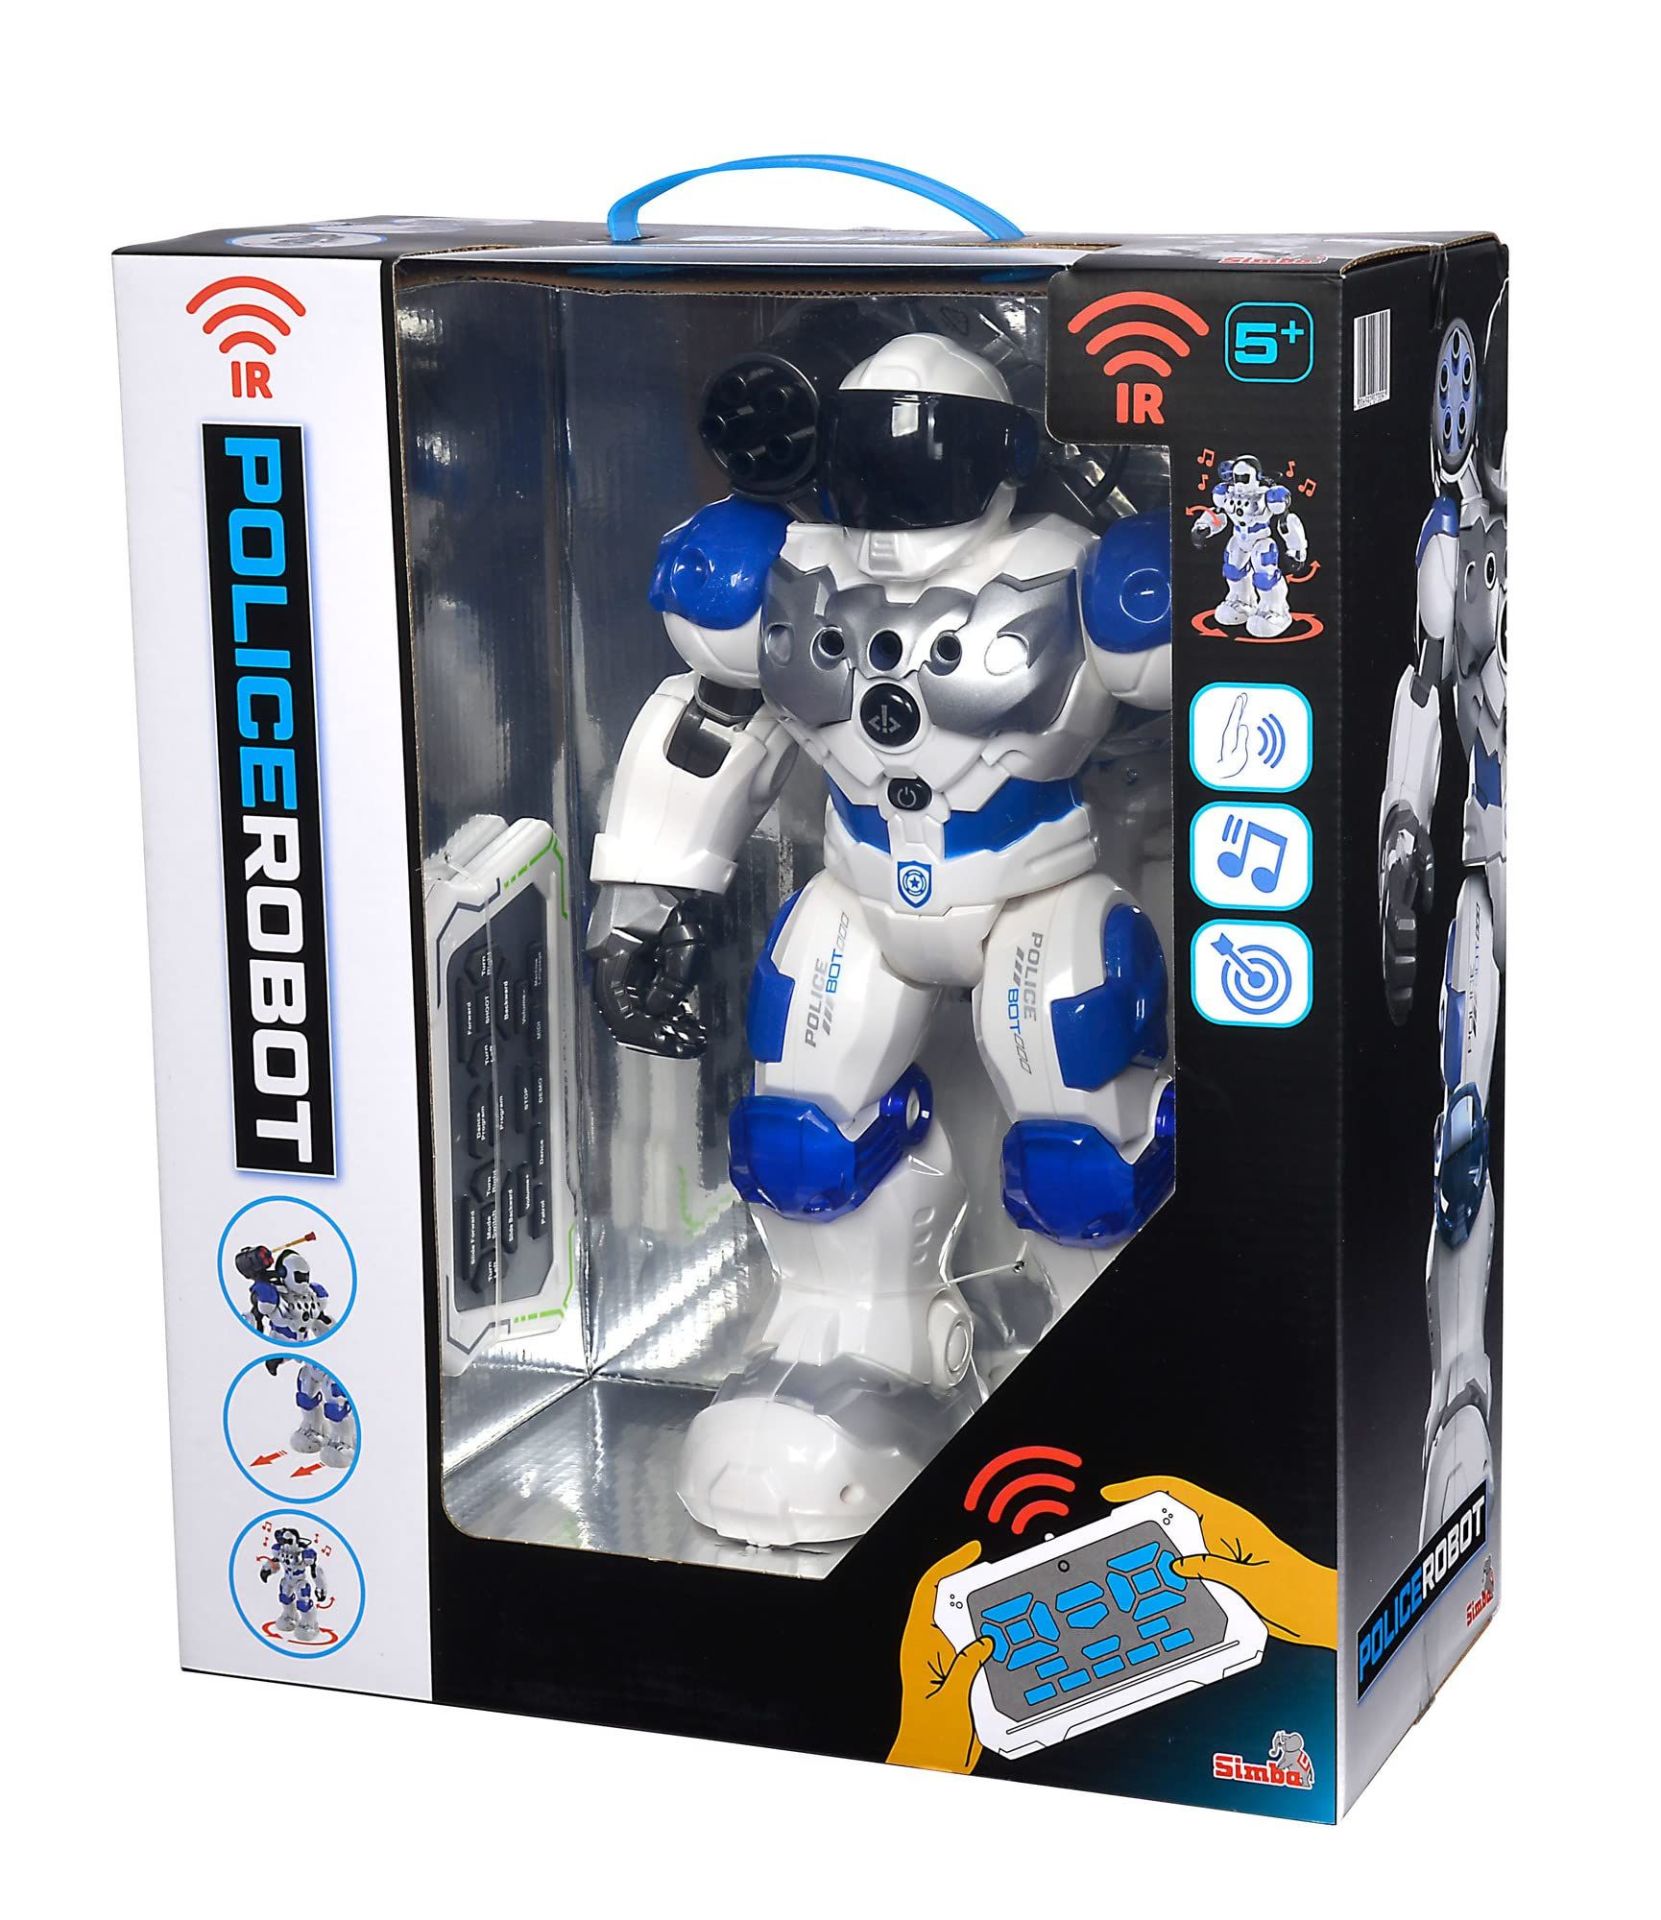 Simba PF Robot With Infra Red Contol 042509